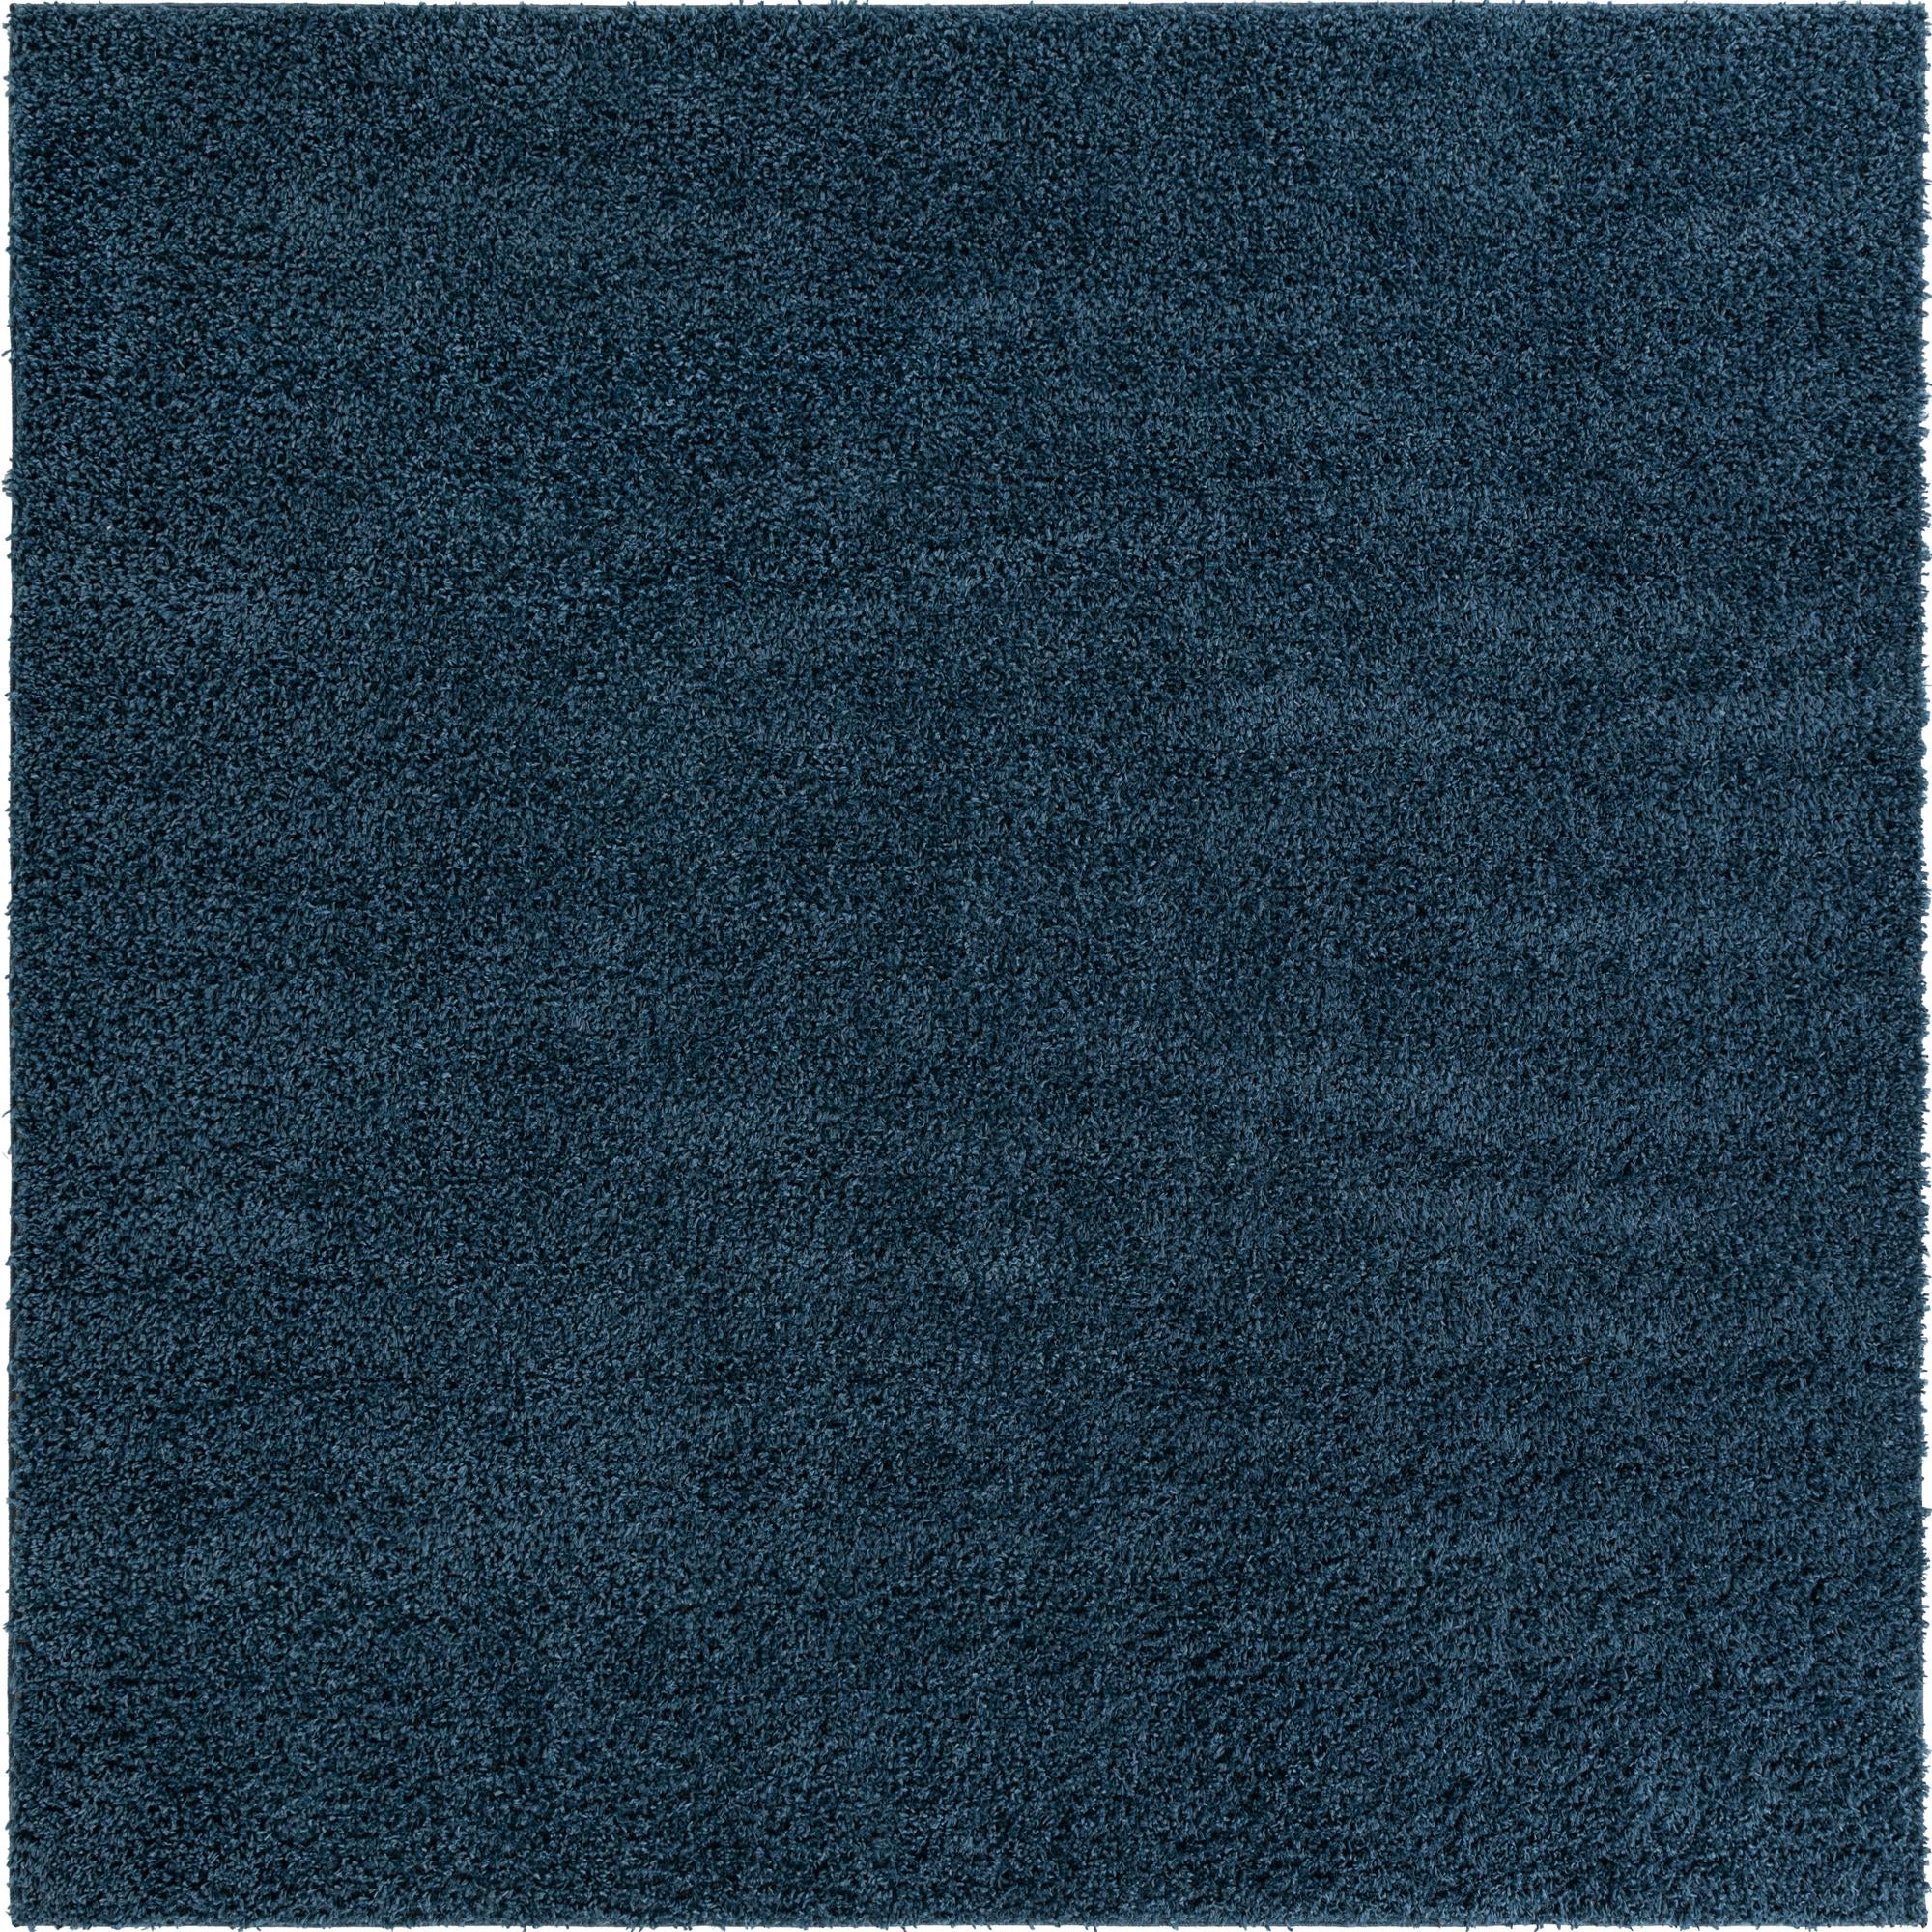 Unique Loom Davos Shag Rug Marine Blue 10' Square Solid Comfort Perfect For Dining Room Living Room Bed Room Kids Room - image 3 of 8